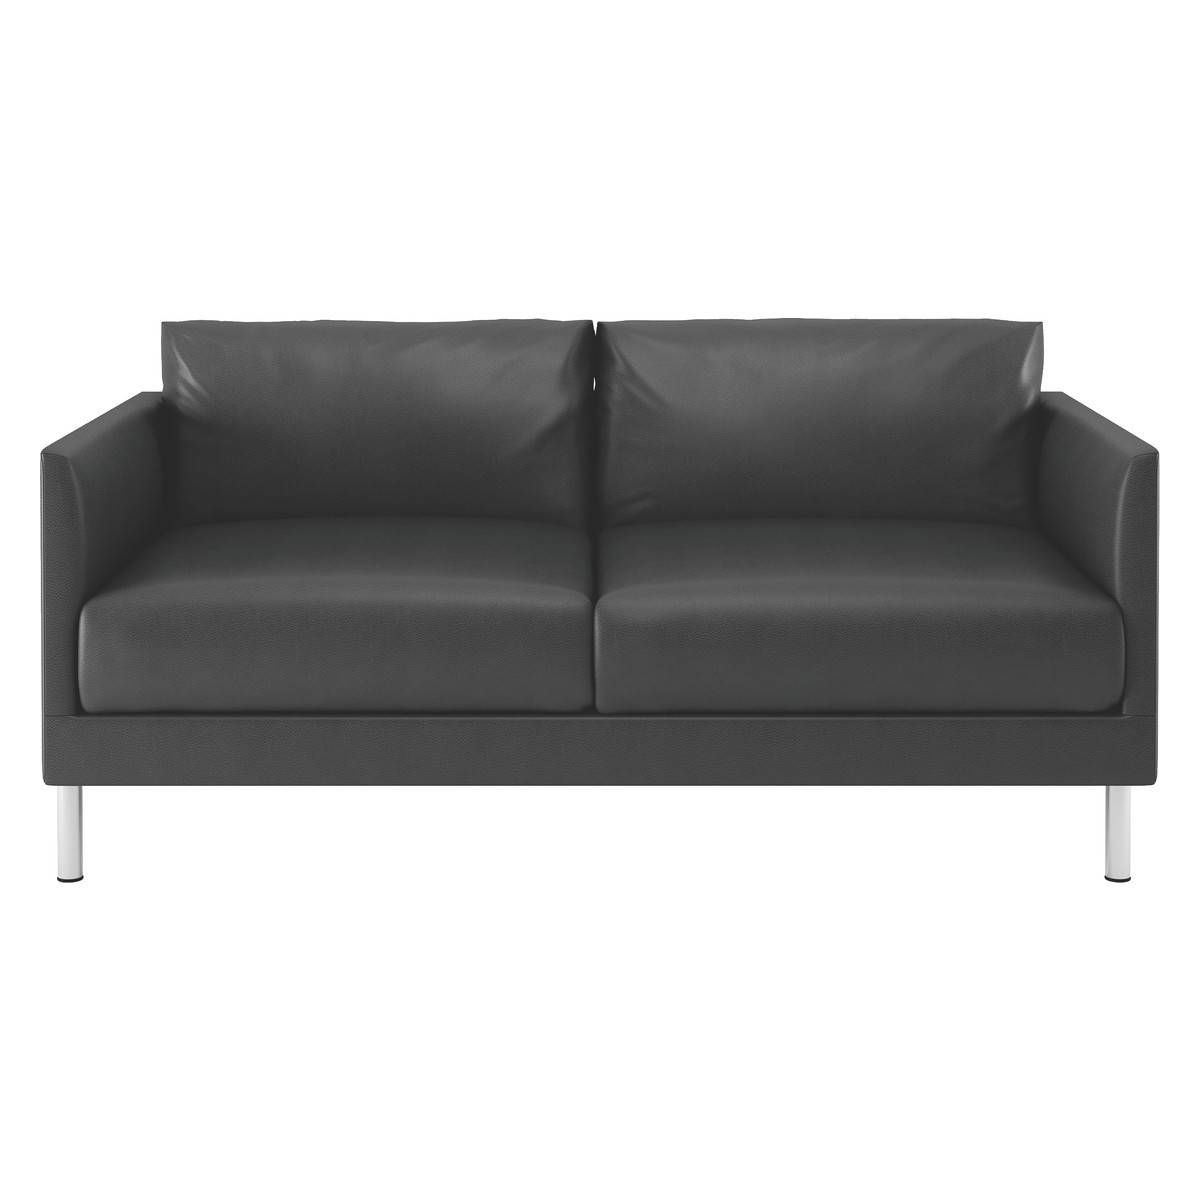 Hyde Black Leather 2 Seater Sofa, Metal Legs | Buy Now At Habitat Uk With Black 2 Seater Sofas (View 6 of 30)